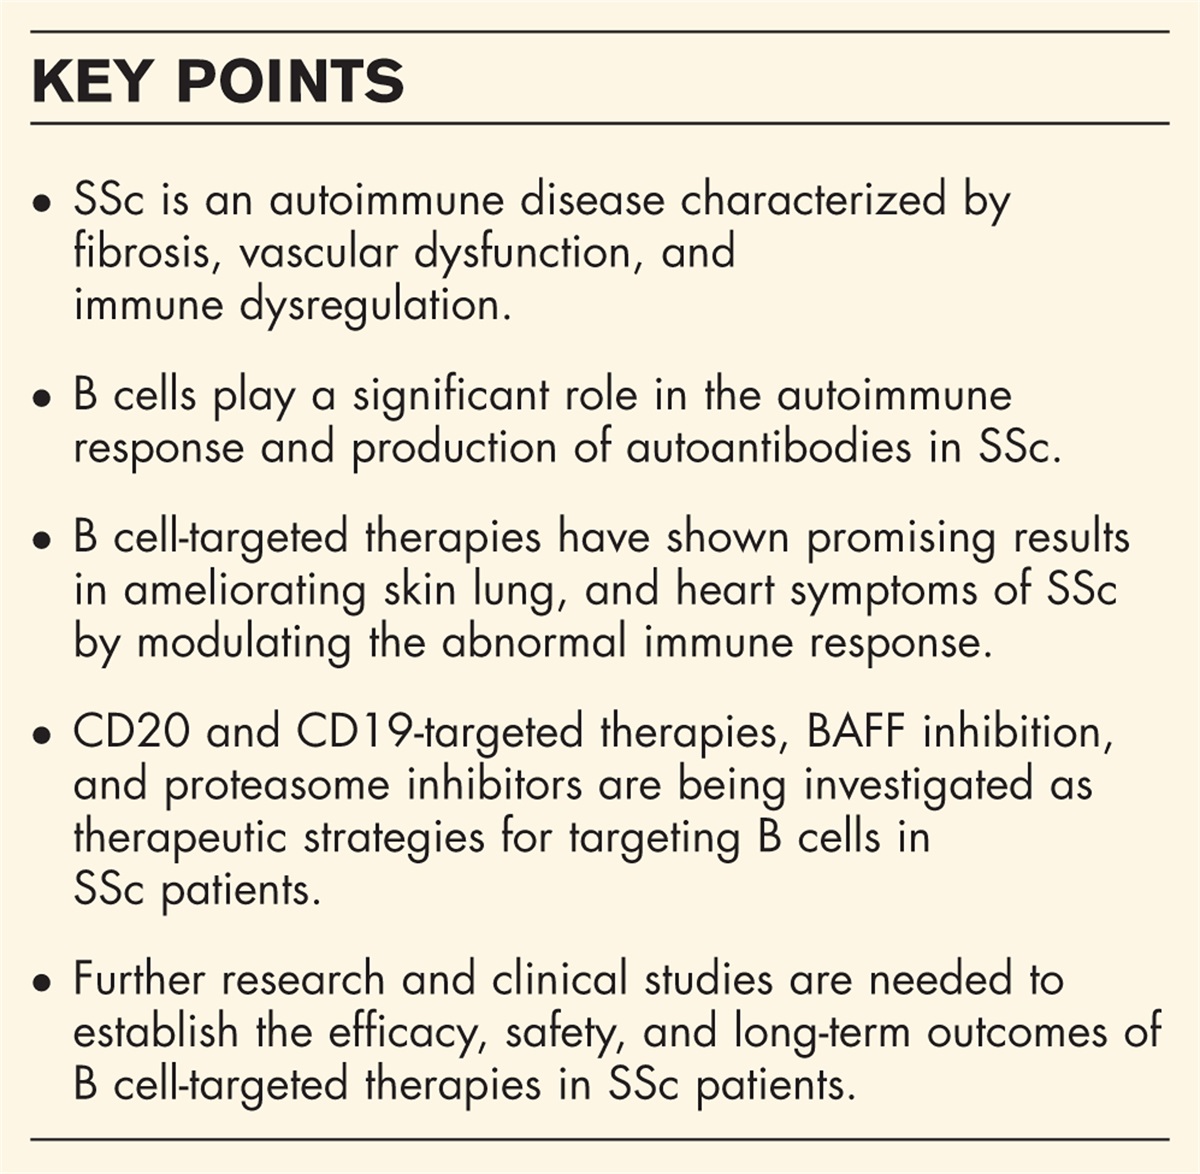 Targeting B cells for treatment of systemic sclerosis